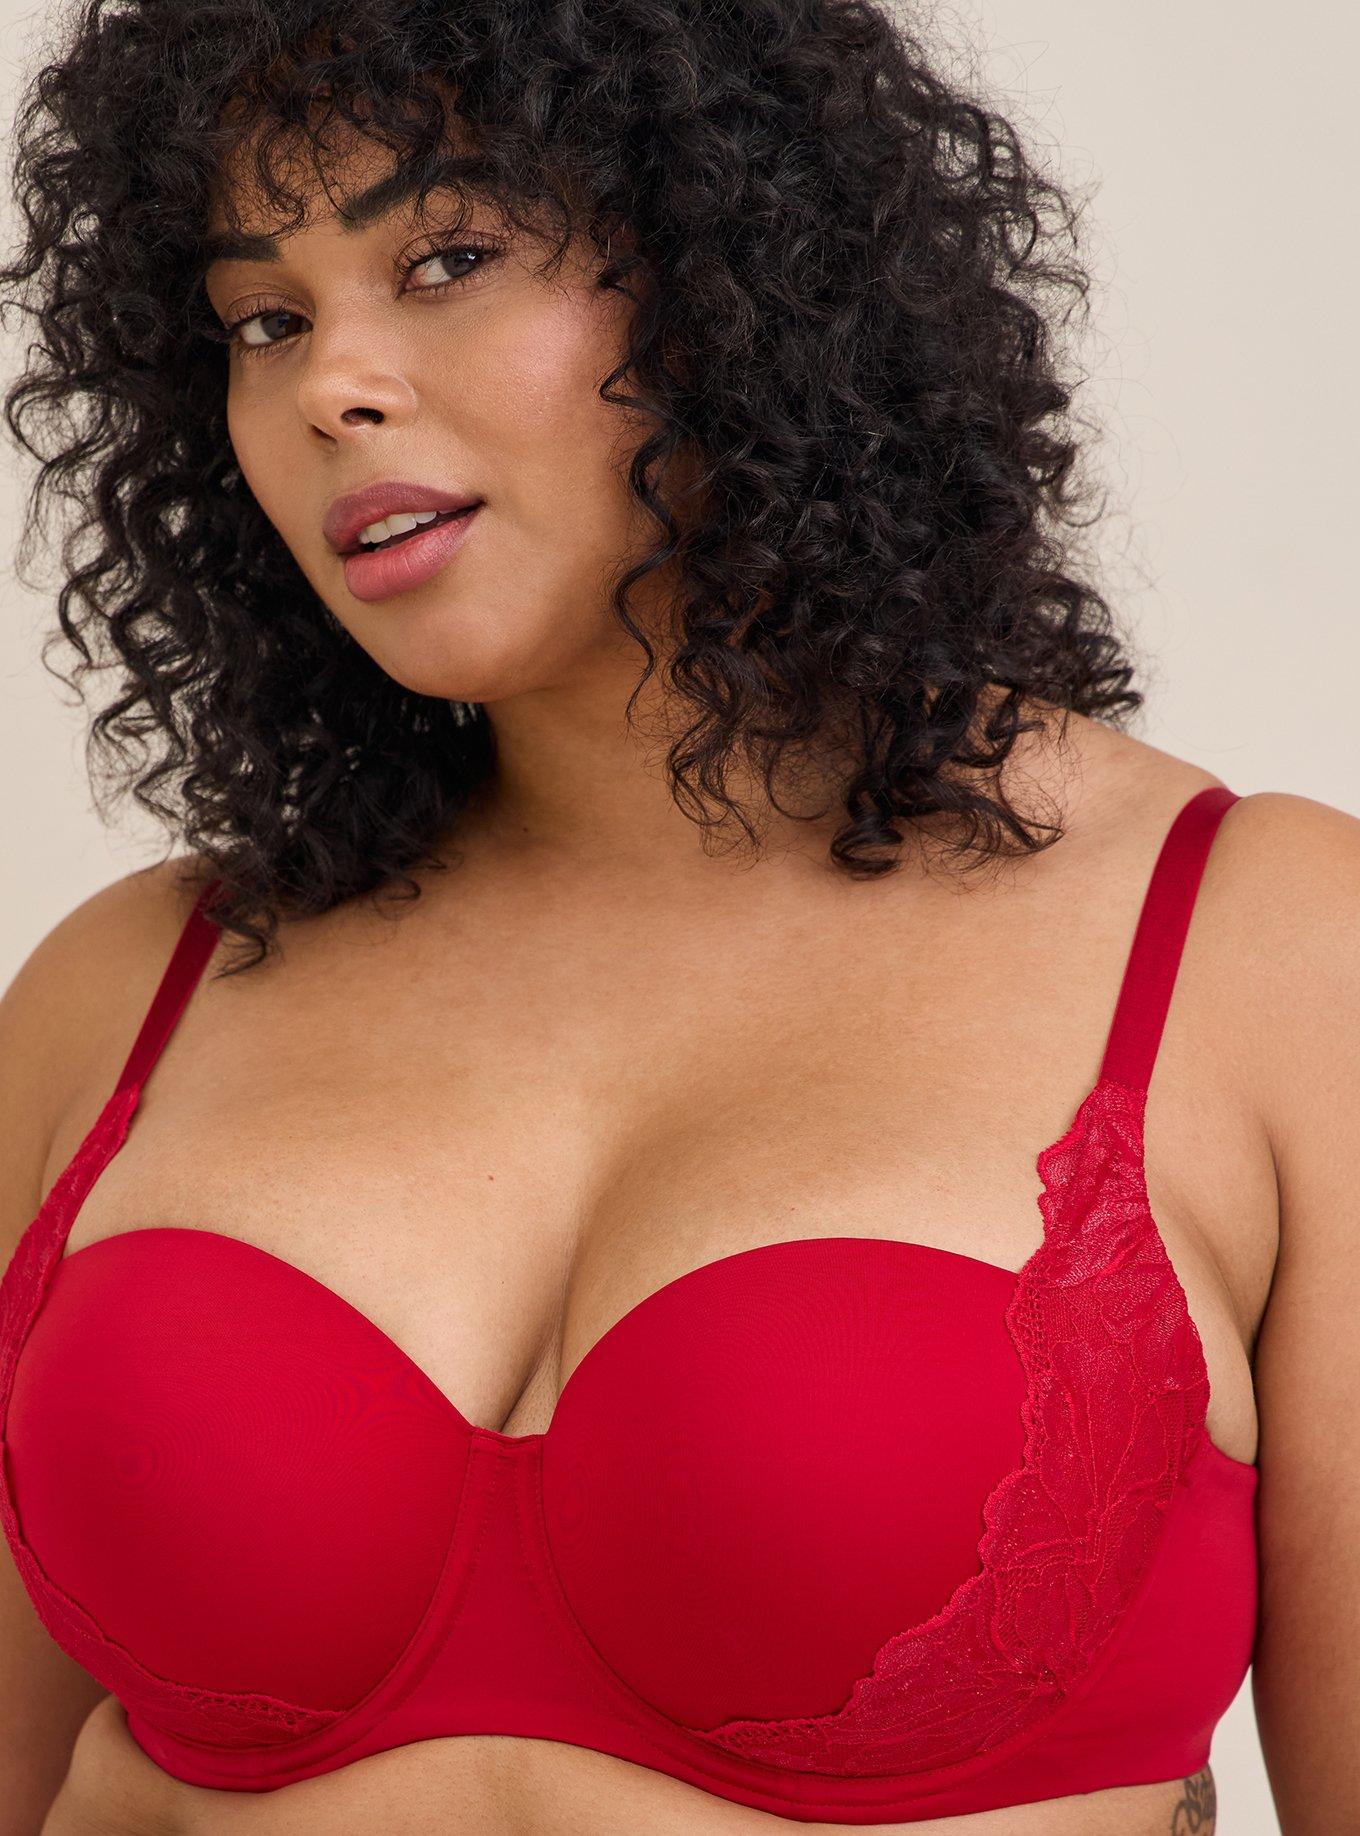 SALES POST: XL - Torrid size 3 (24ish I think?), size 10 shoes, 42DD bras,  size 8 panties